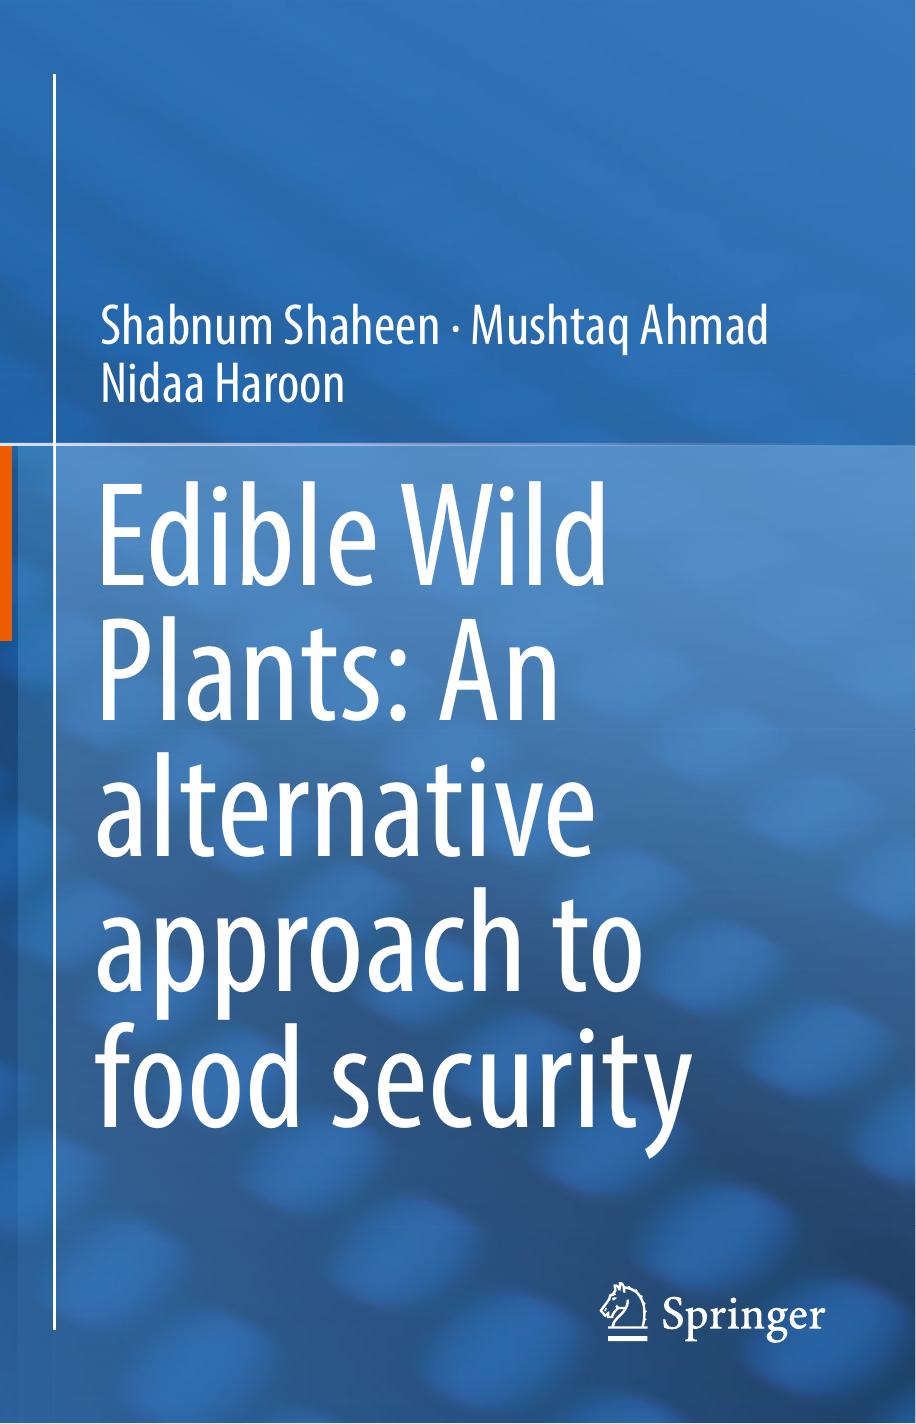 Edible wild plants   an alternative approach to food security 2017